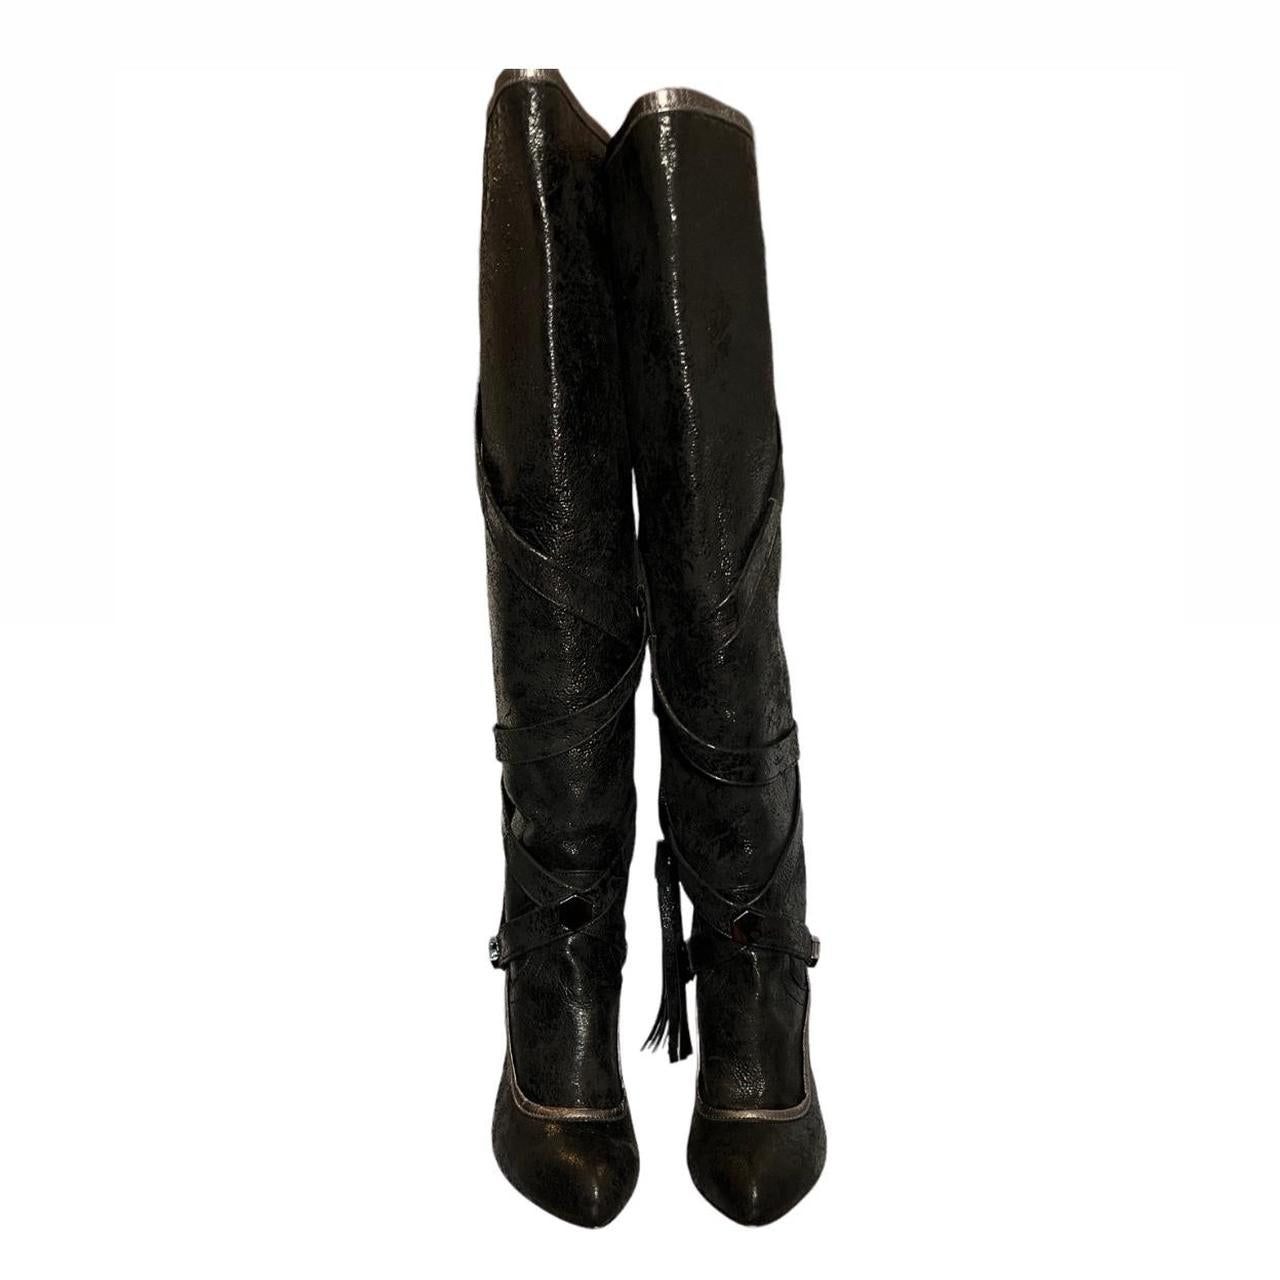 Galliano Tall Glitter Boots with Lace Around Fringe Ties